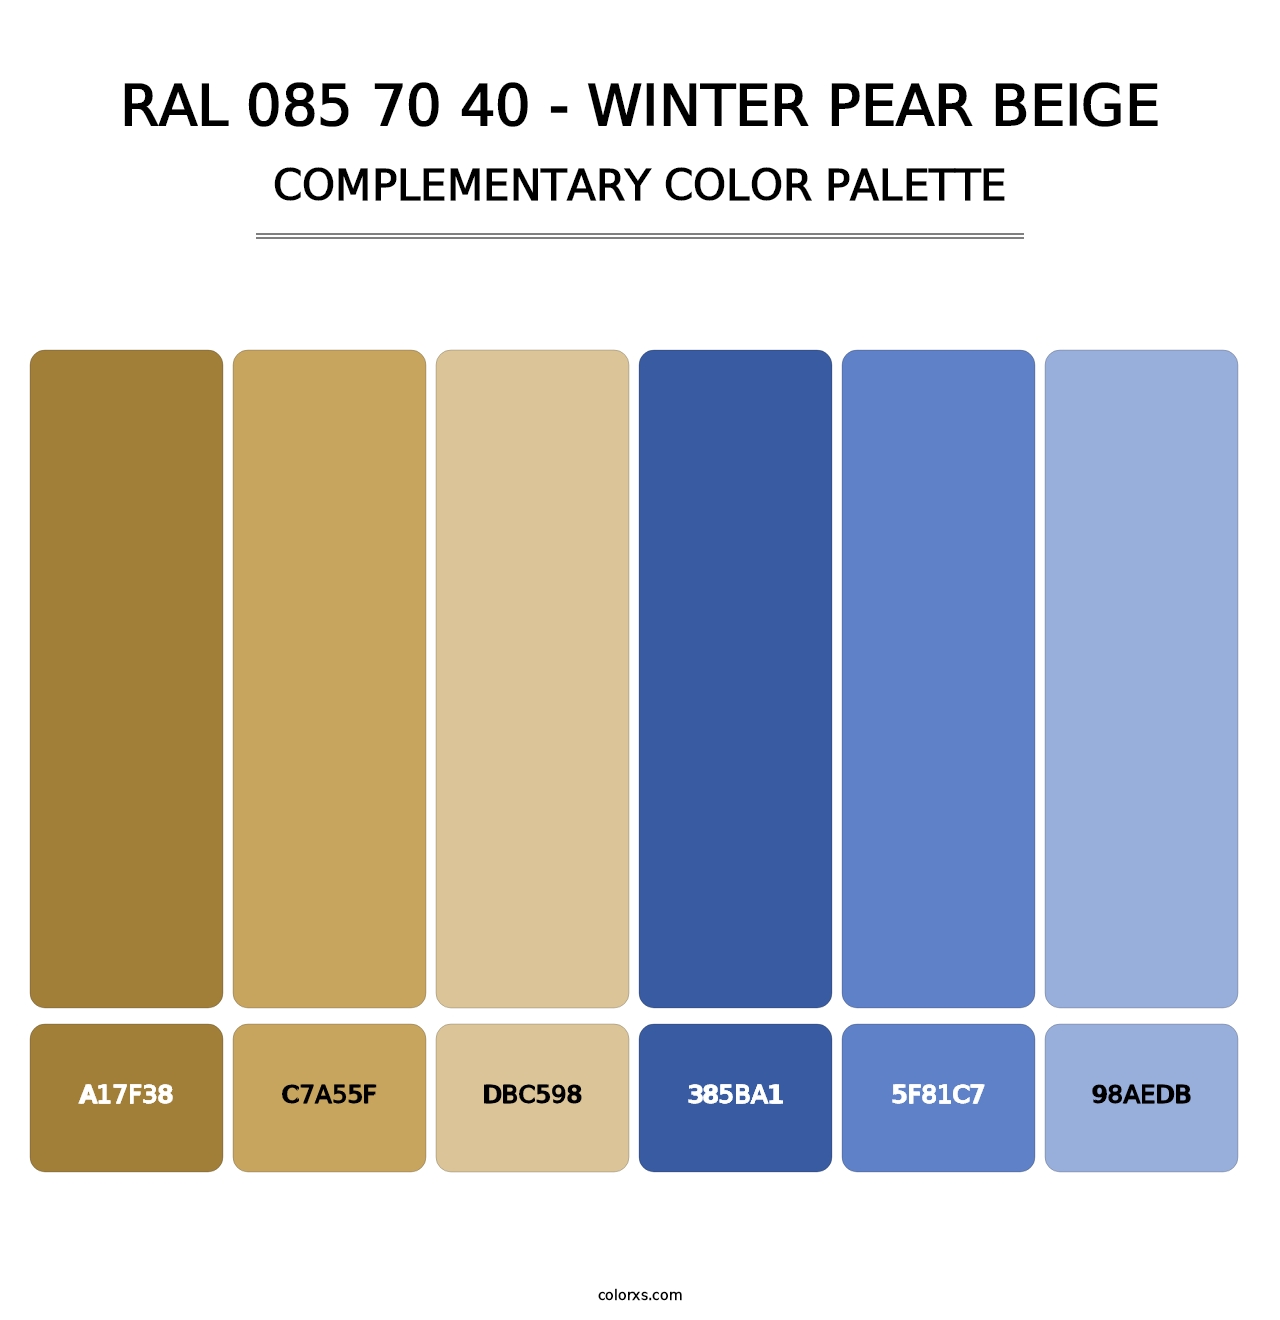 RAL 085 70 40 - Winter Pear Beige - Complementary Color Palette